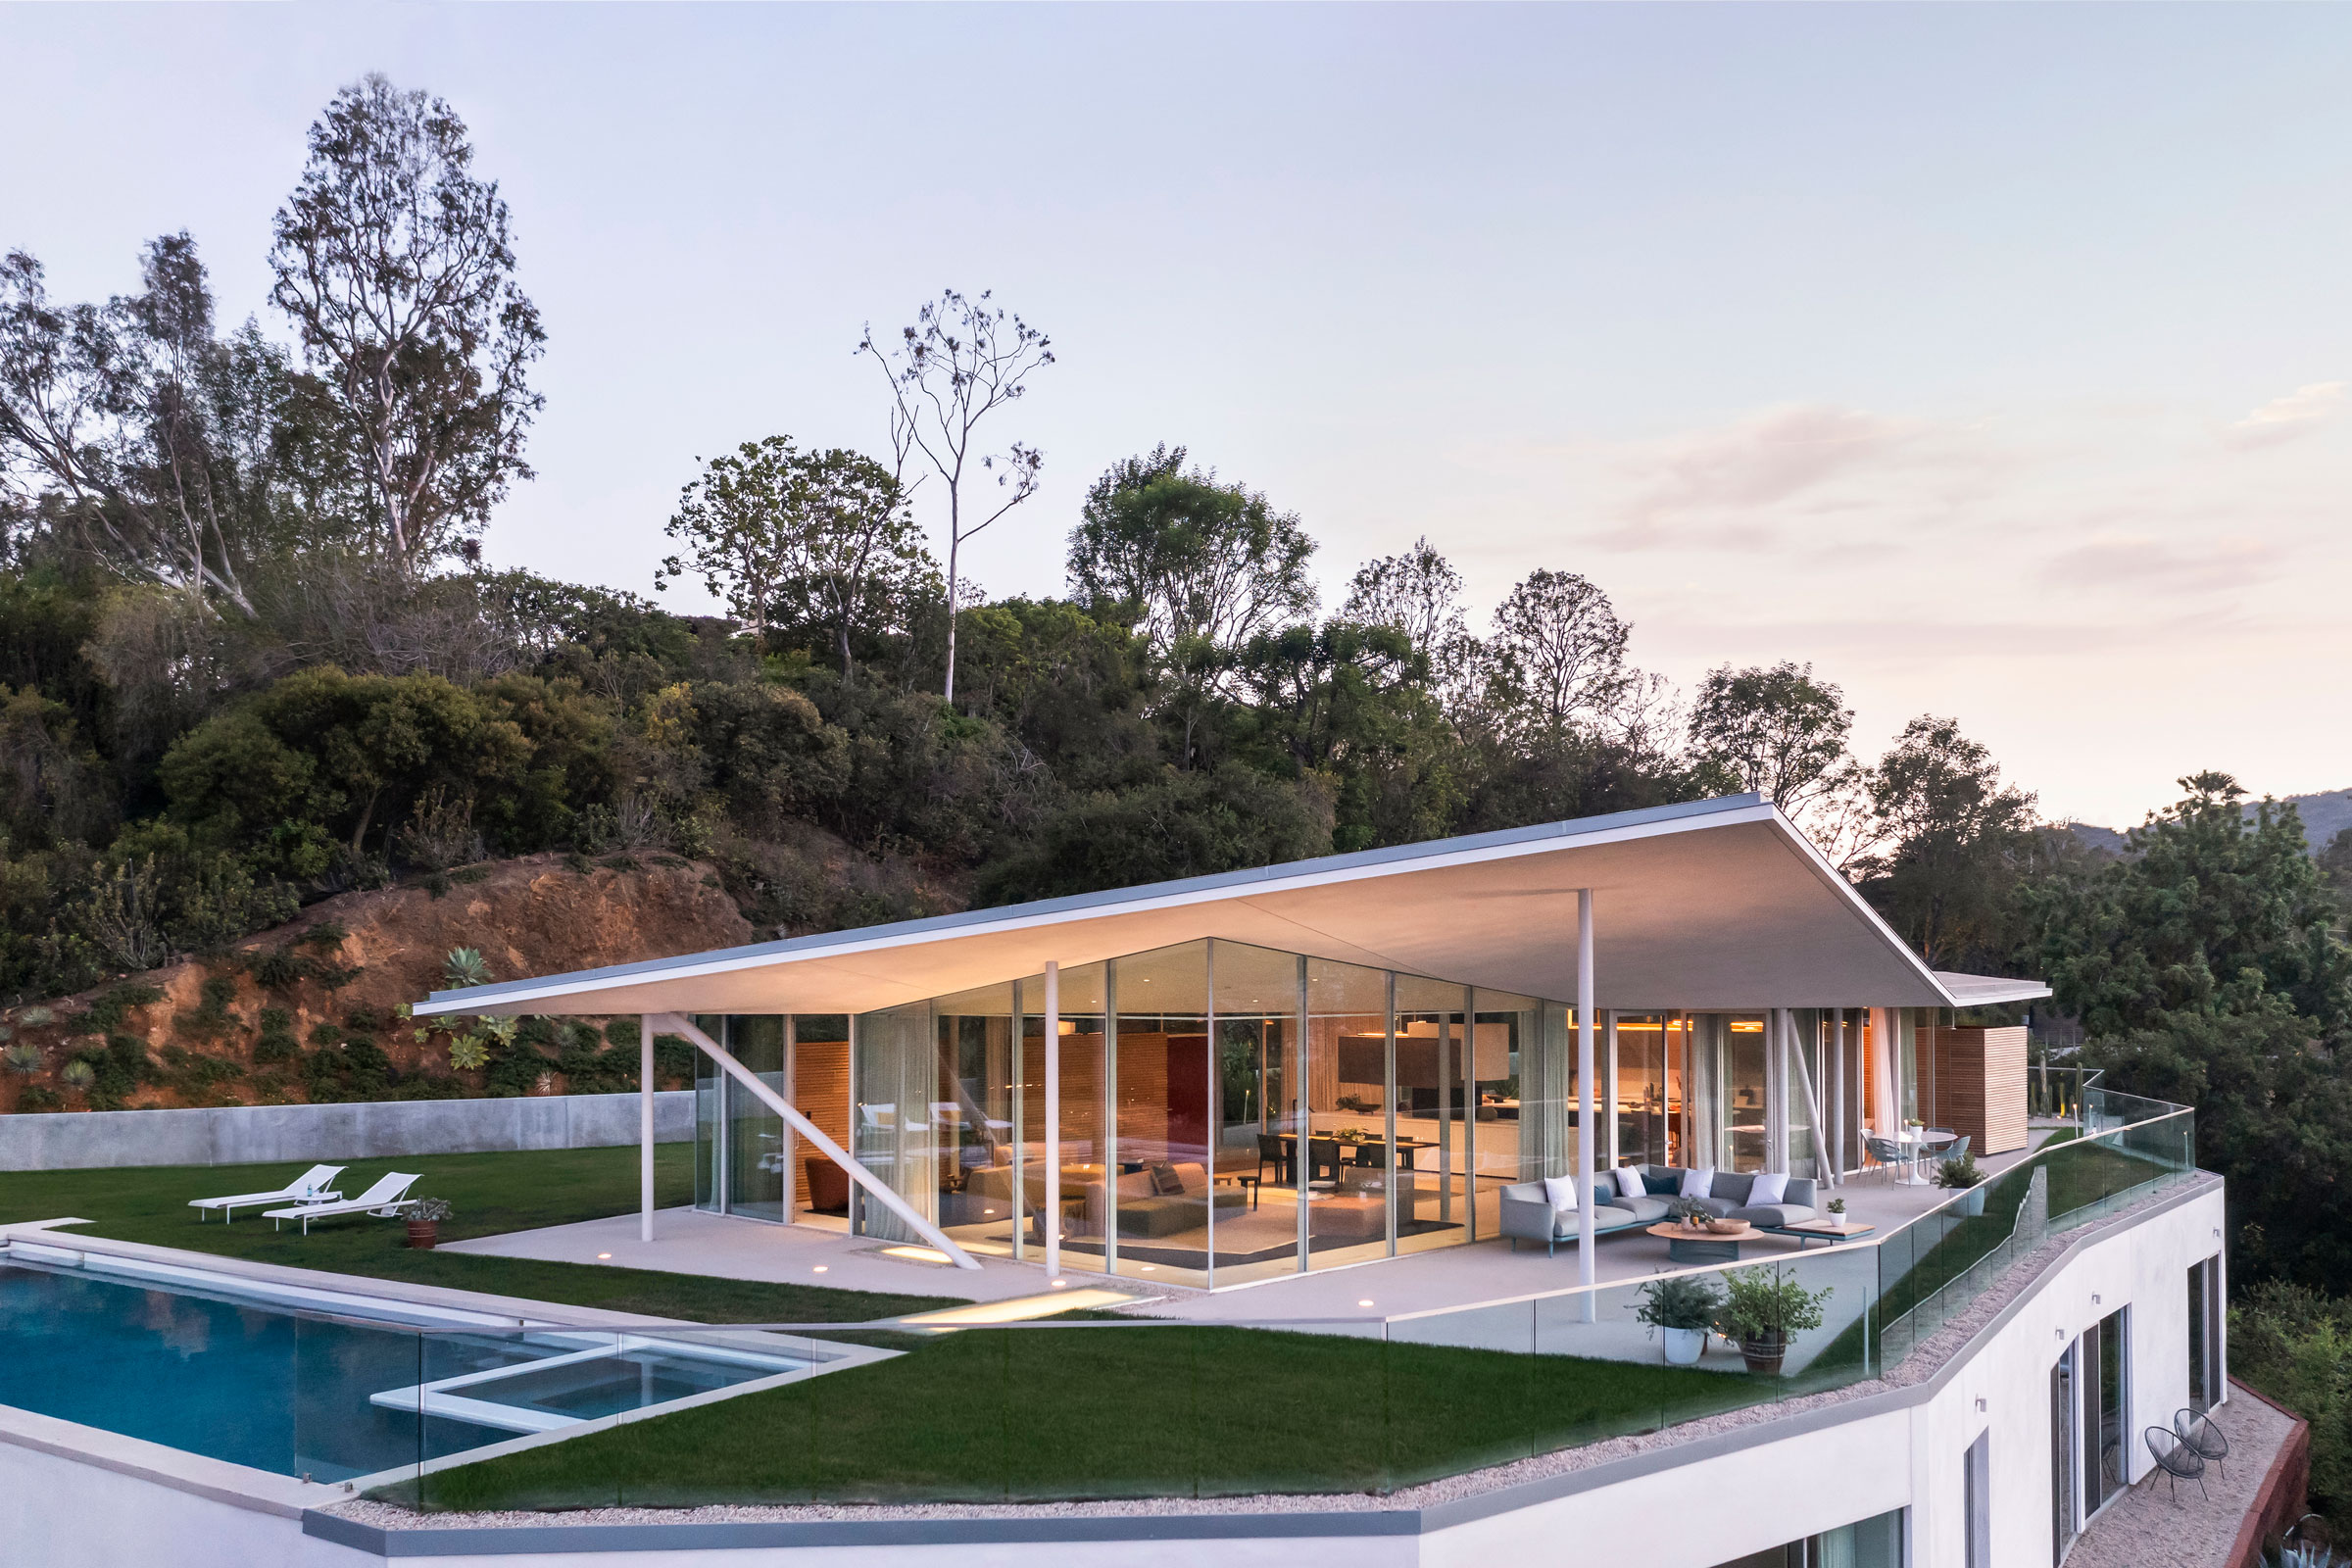 Gluck+ Designed the California House as a Masterful Exercise in Simplicity